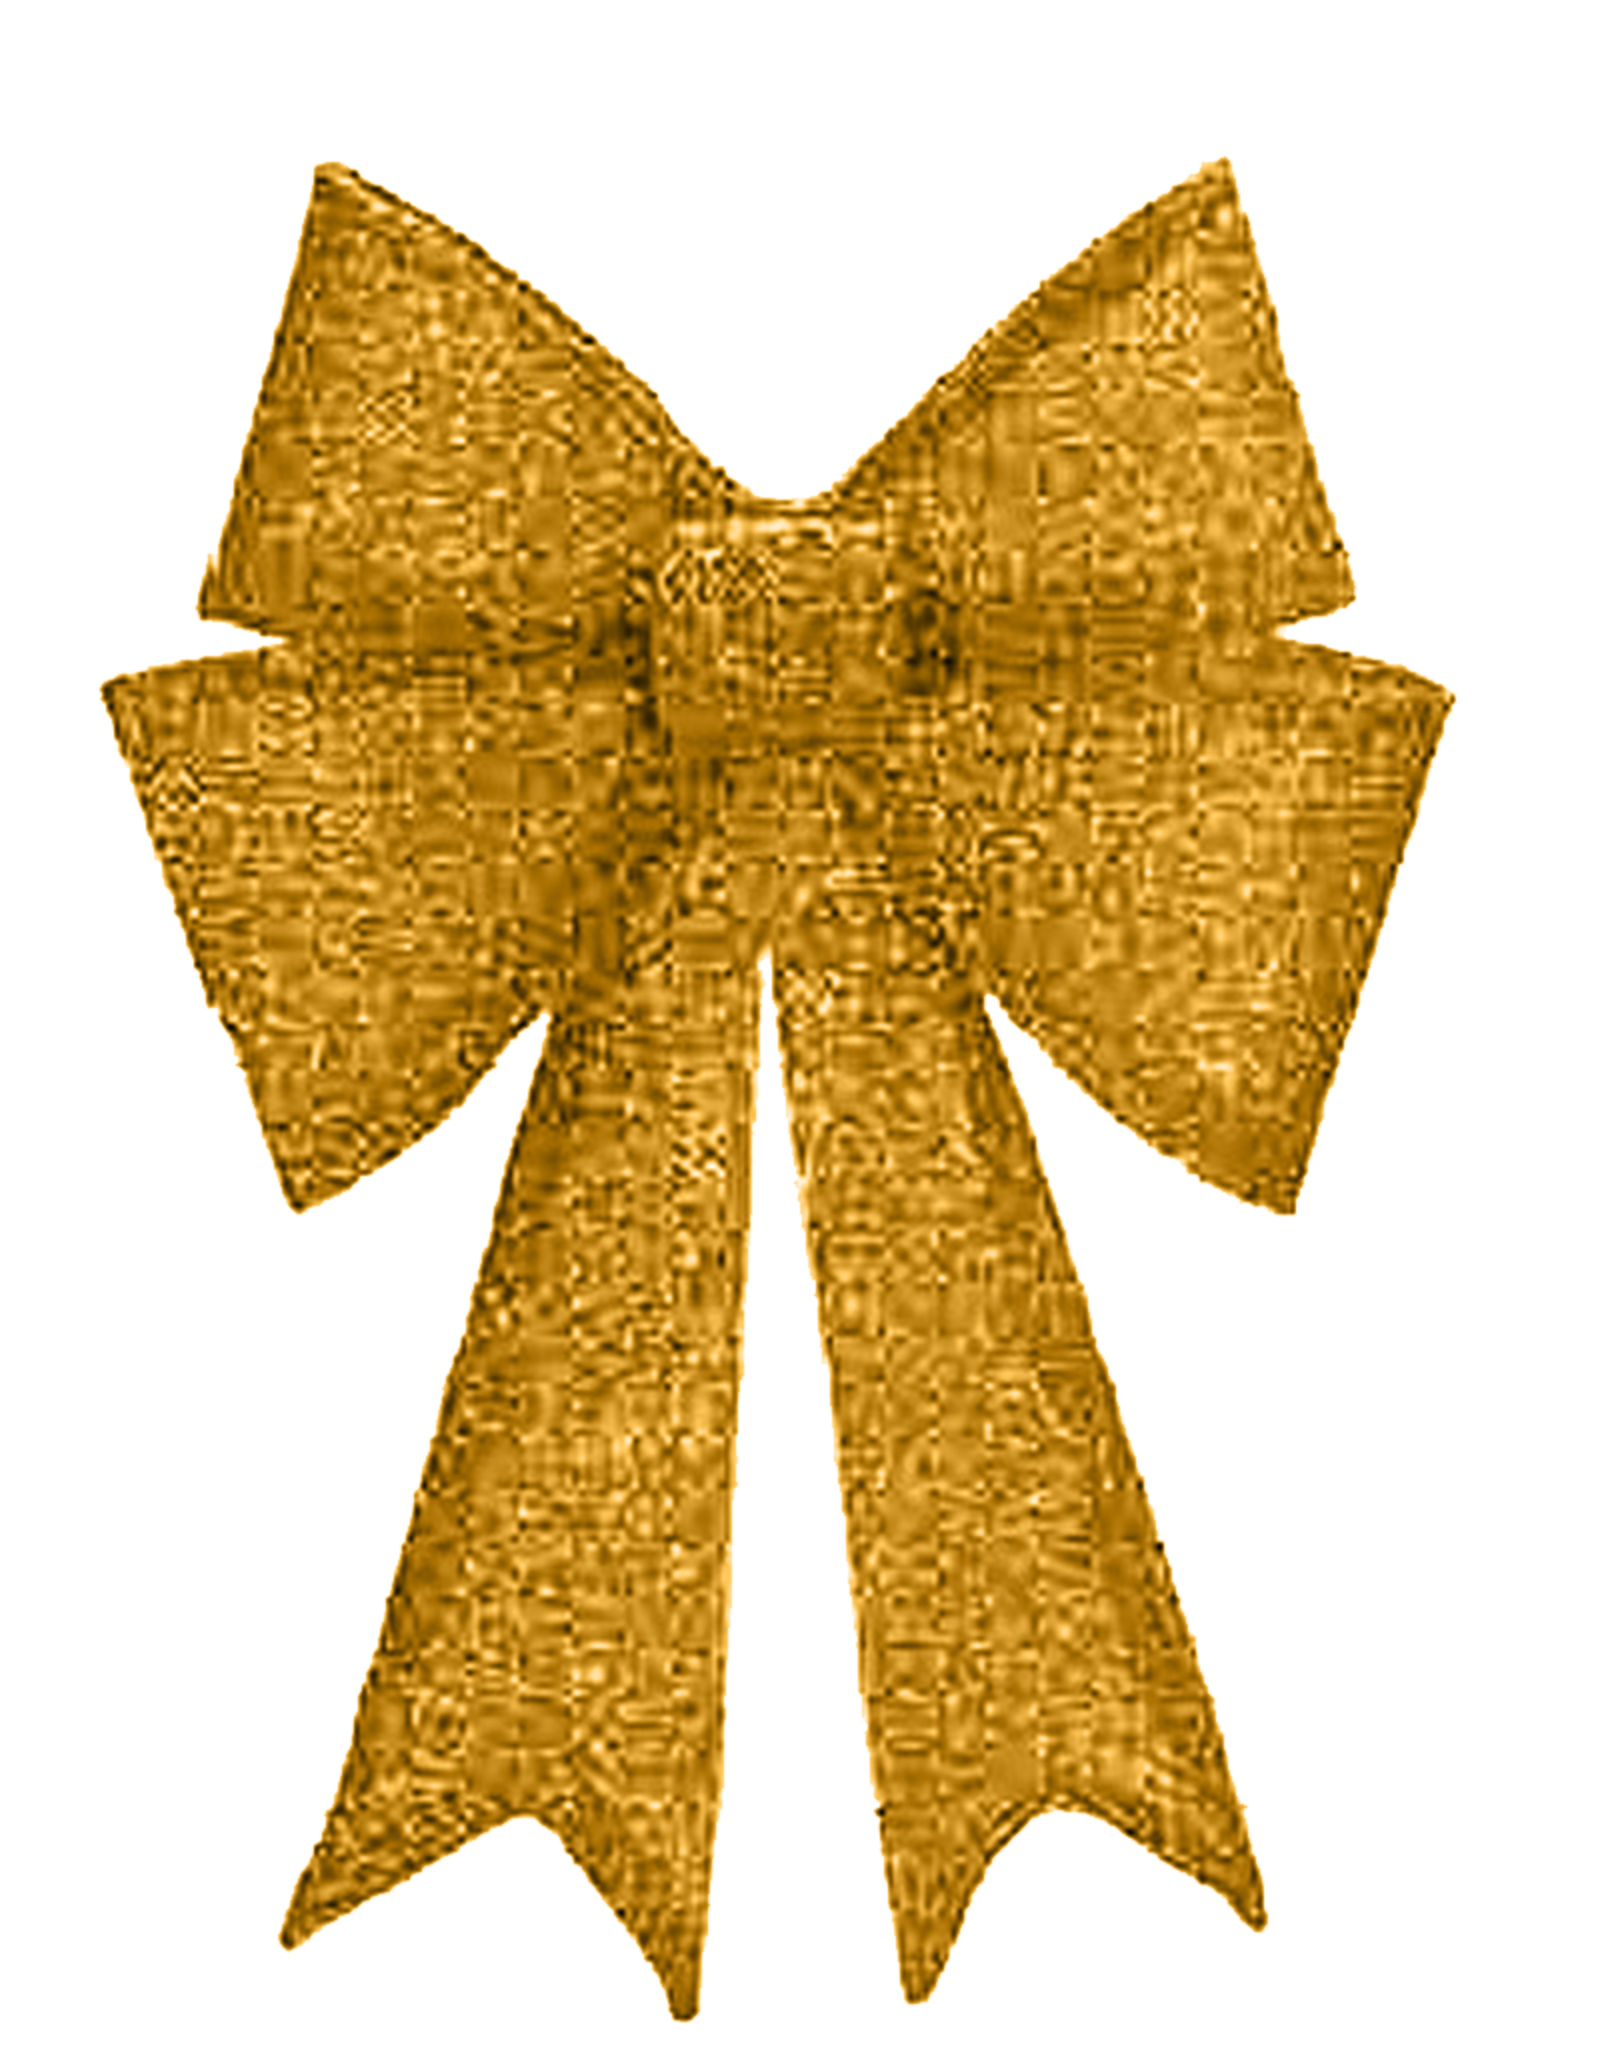 Gold Fabric Shimmering Bow LG 13x18 - Digs N Gifts